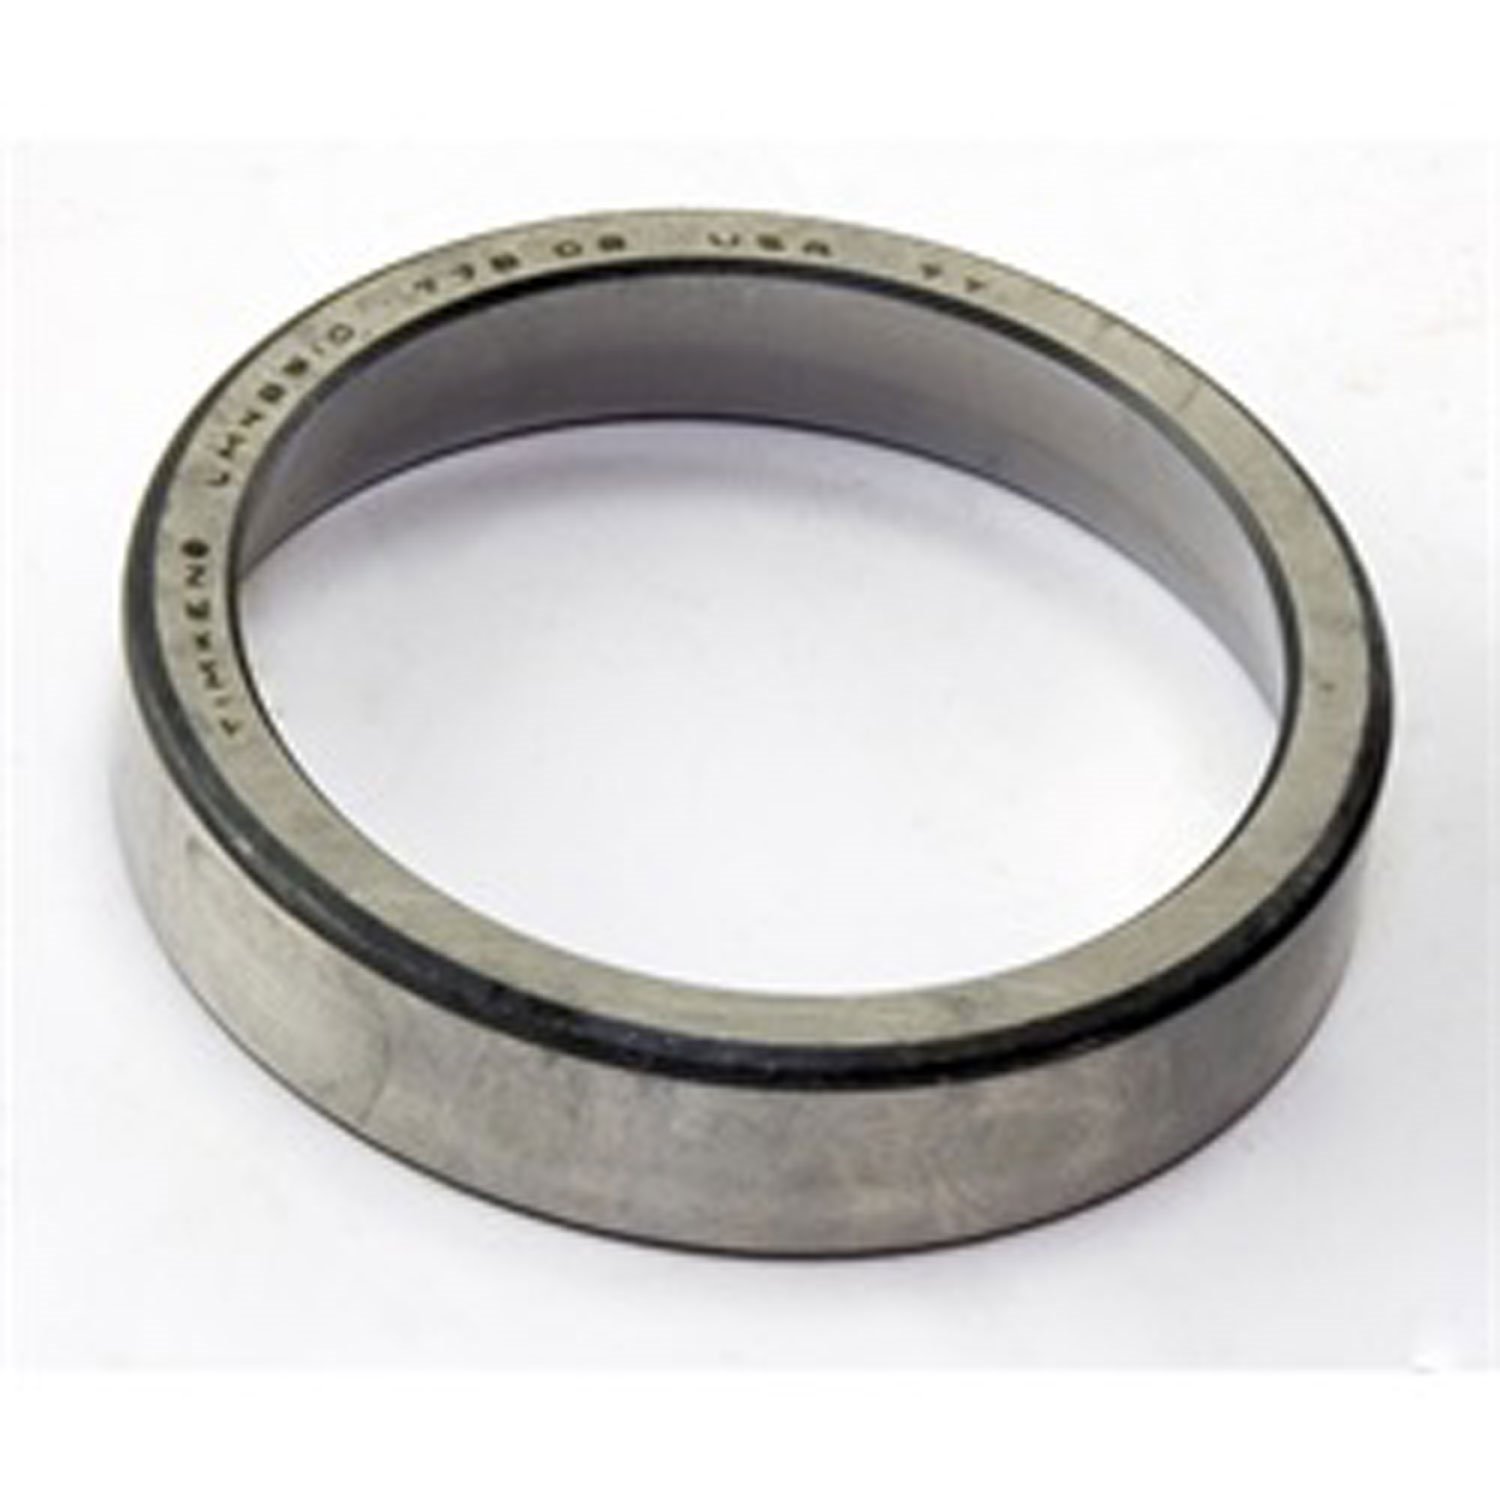 AMC20 Bearing Cup LM48510 1976-1986 Jeep CJ By